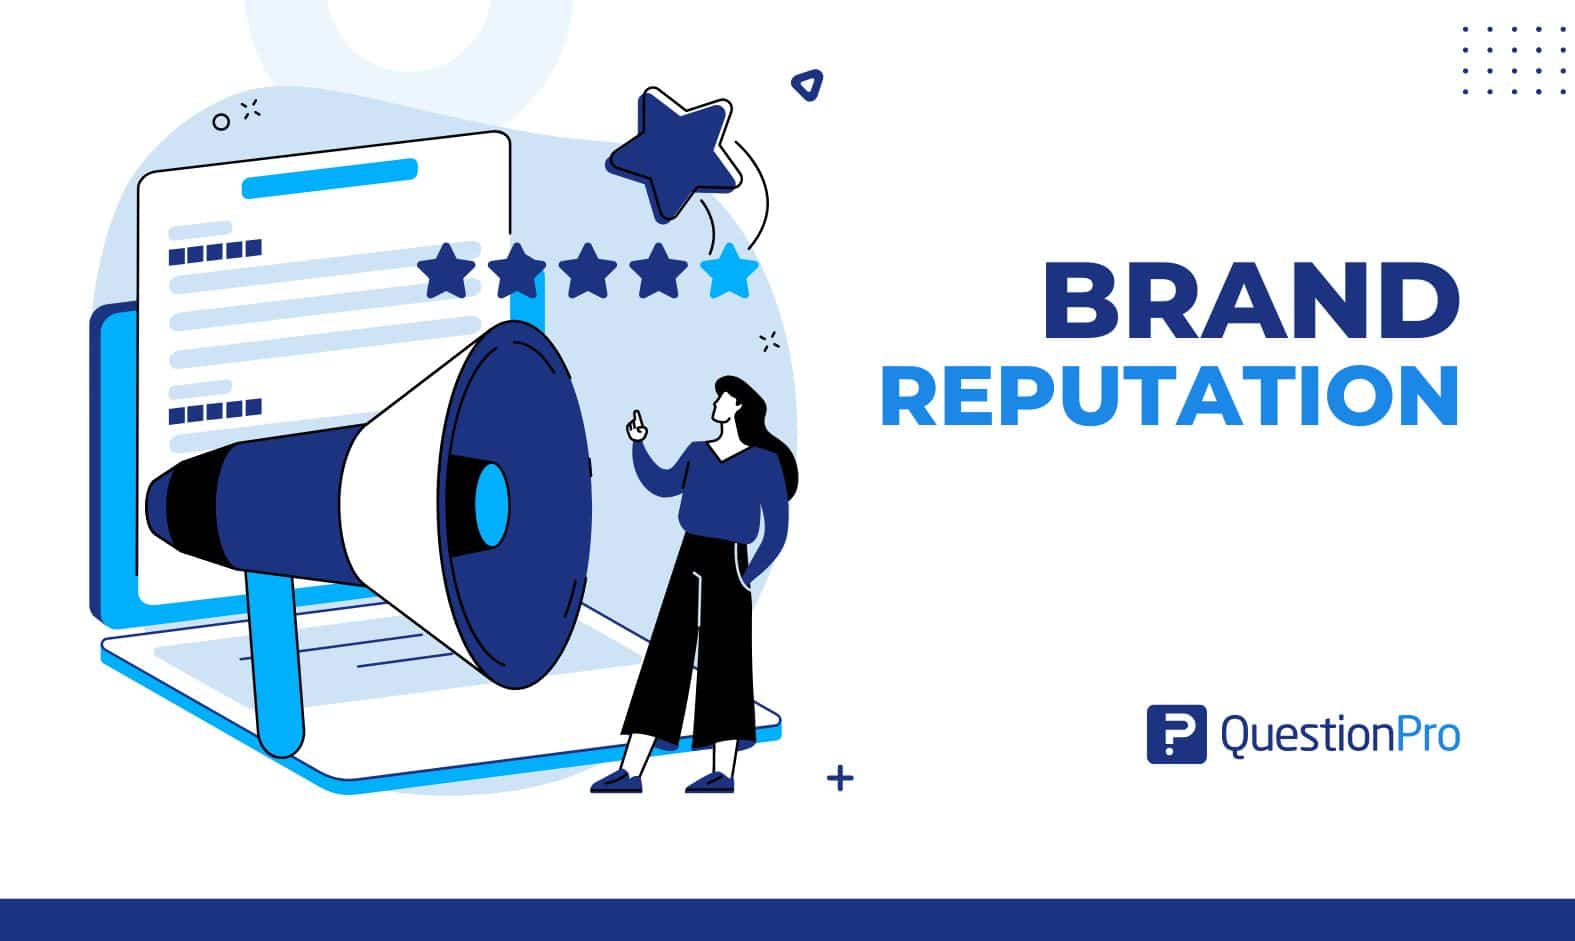 Brand reputation is how customers, employees, and others think of a brand. The stronger a brand reputation is, the more people will trust it.